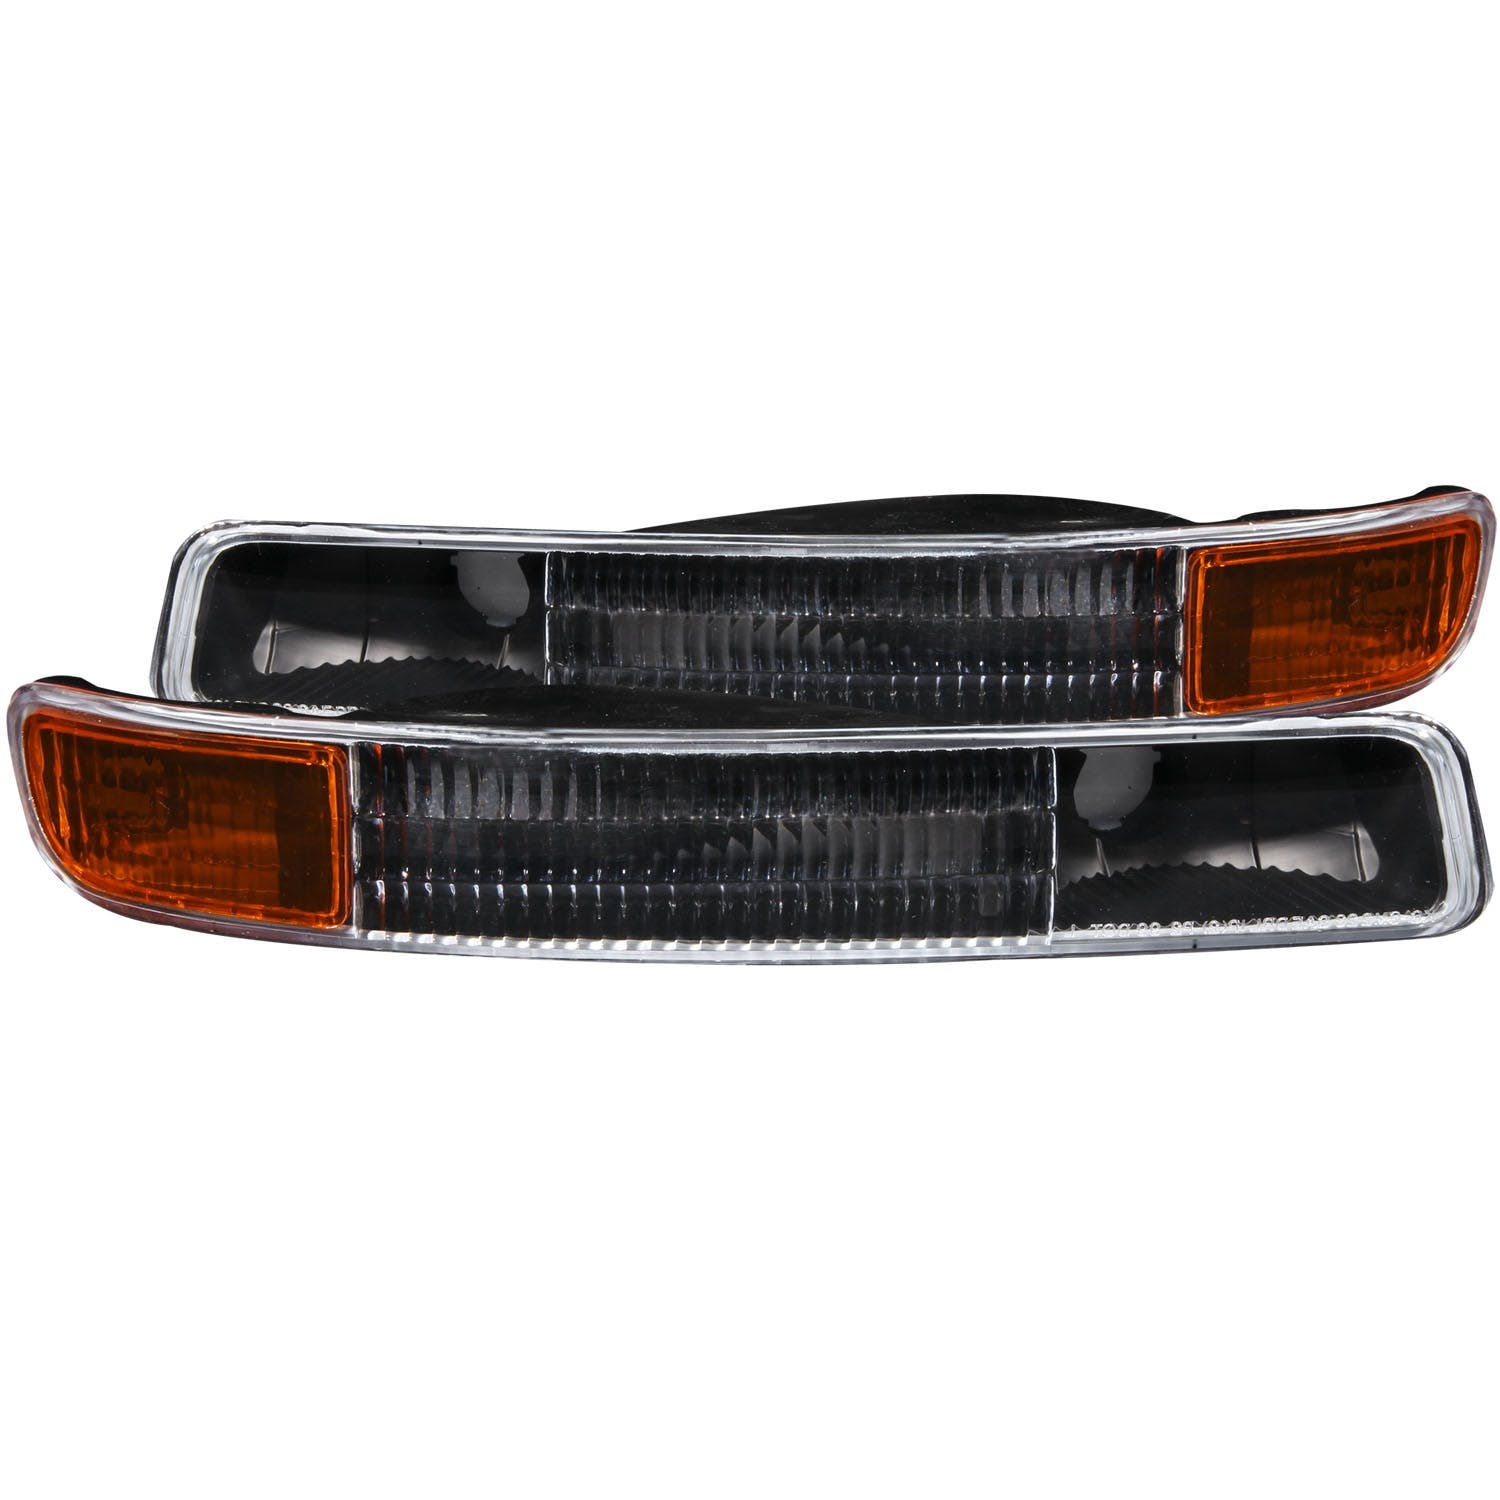 AnzoUSA 511005 Euro Parking Lights Black with Amber Reflector